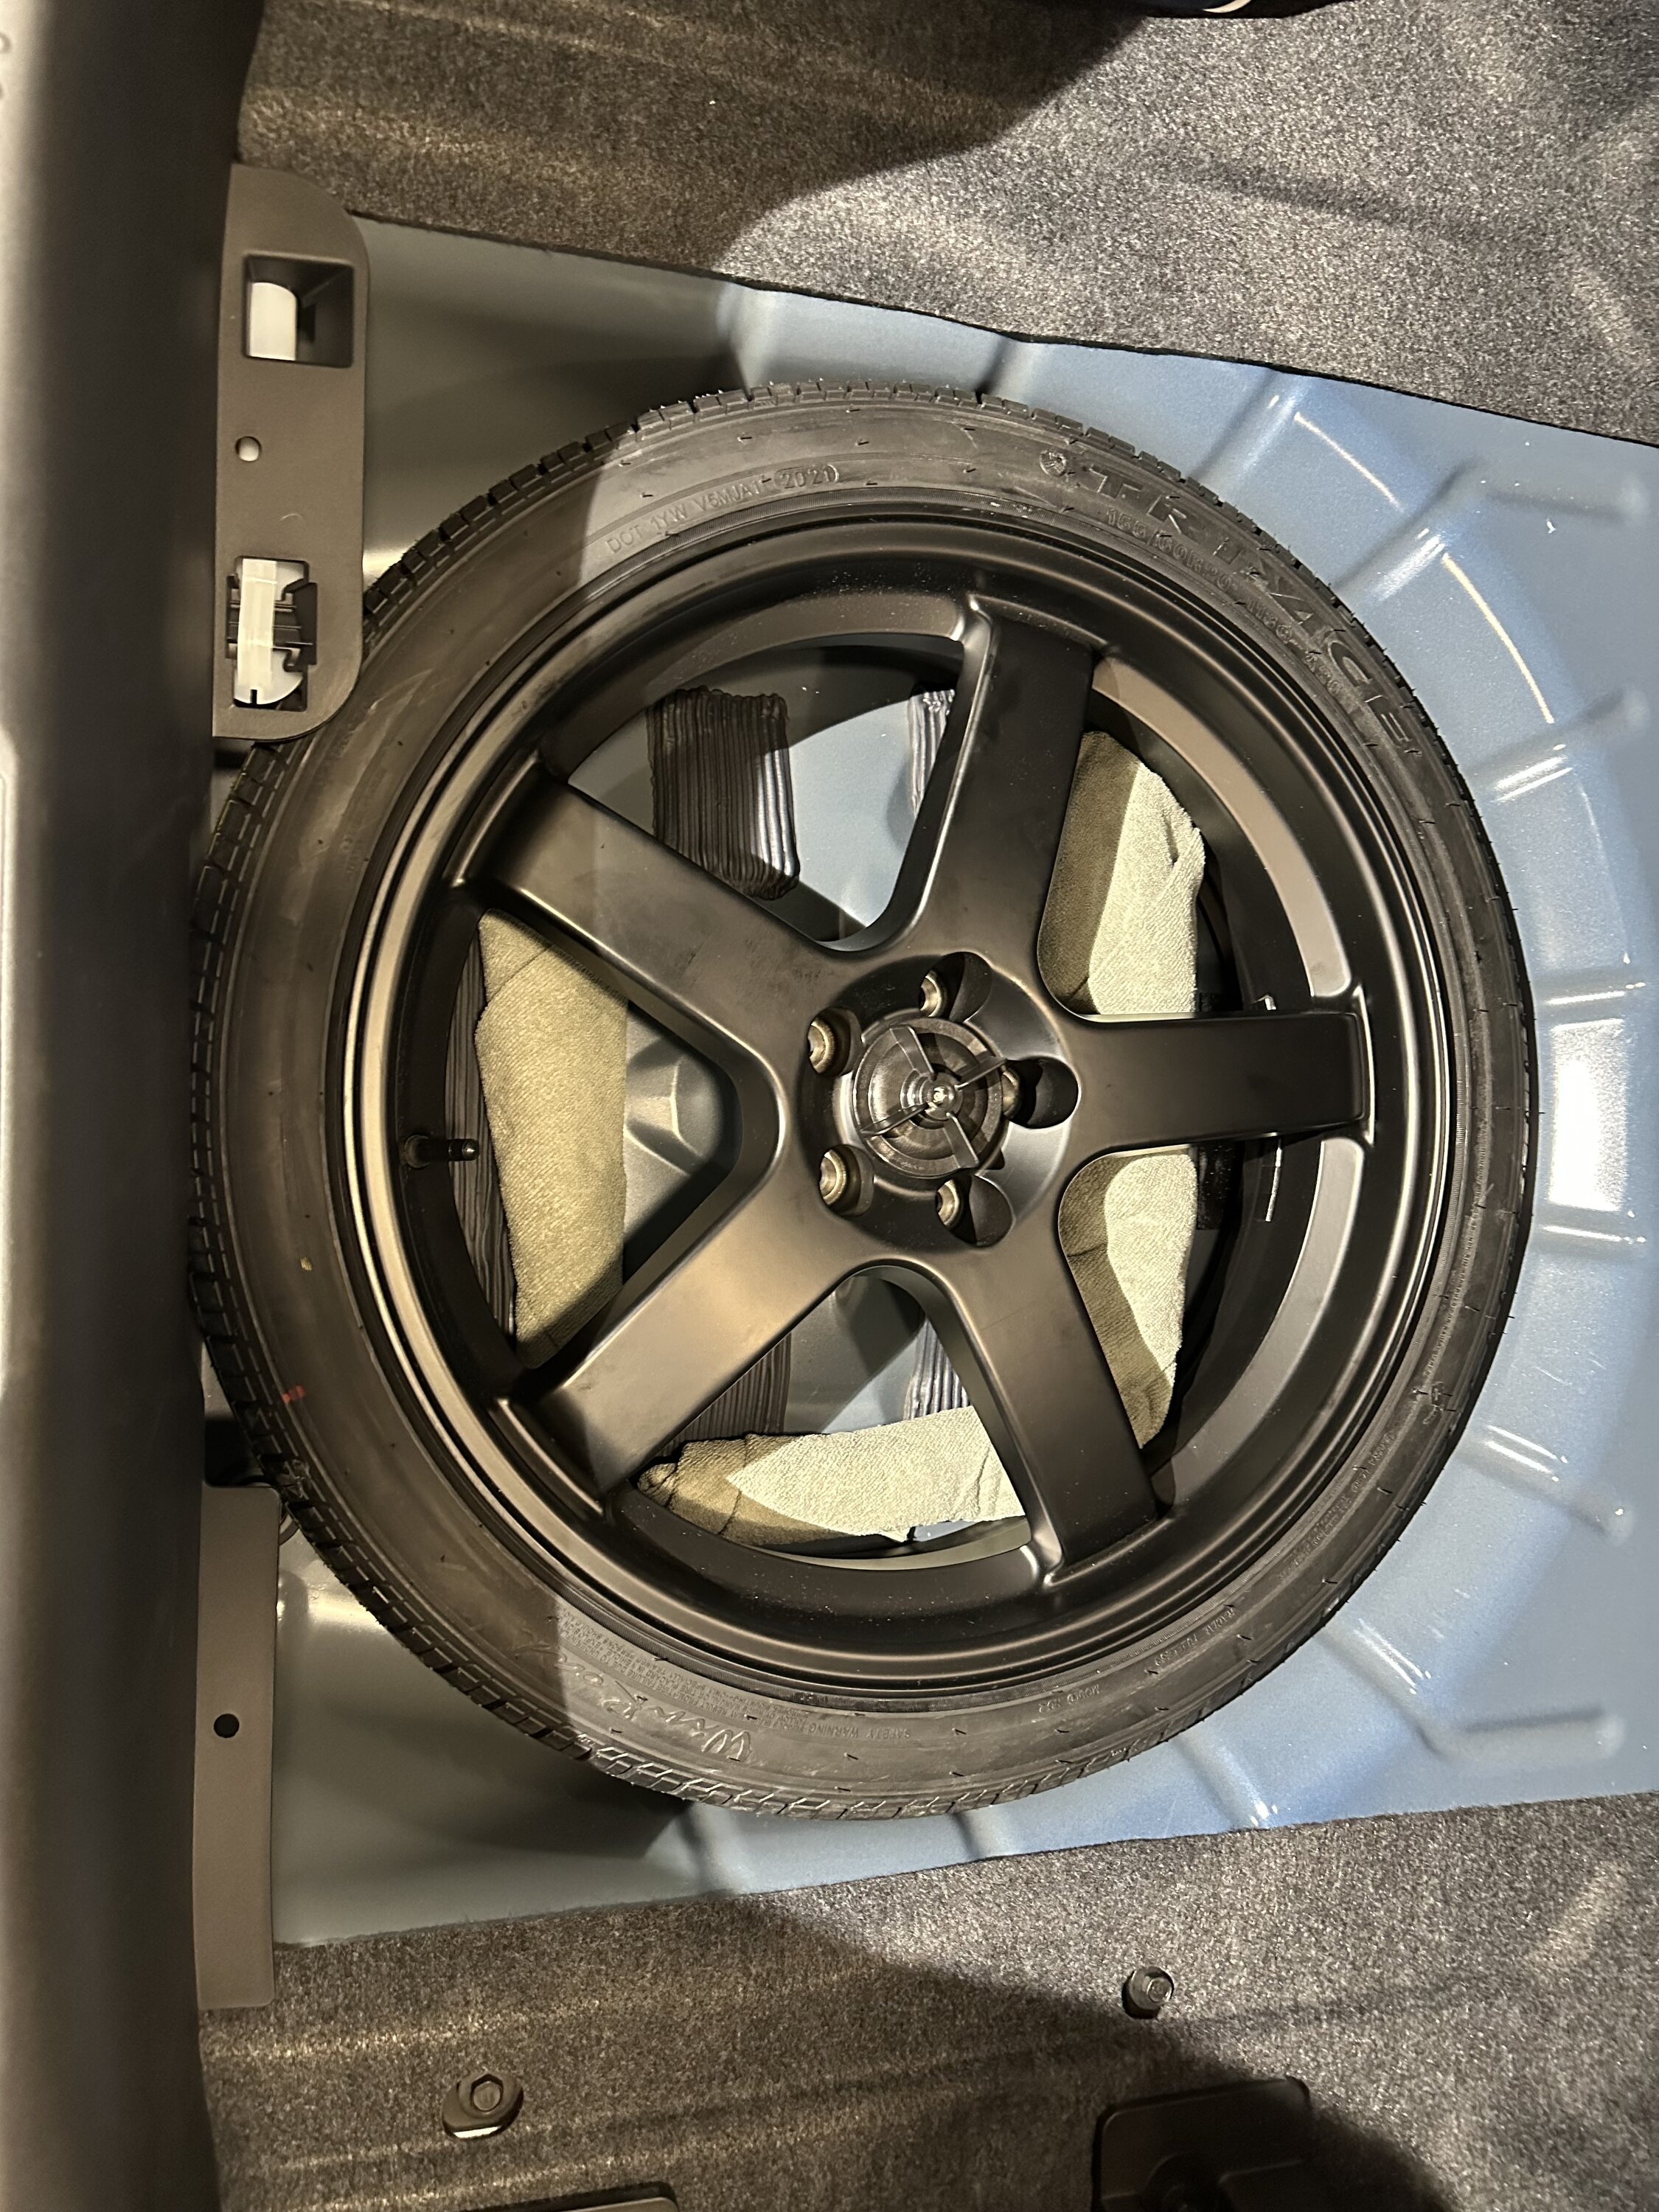 S650 Mustang Spare tire option for Performance Pack or standalone Brembo BBK kit -- tested IMG_7790